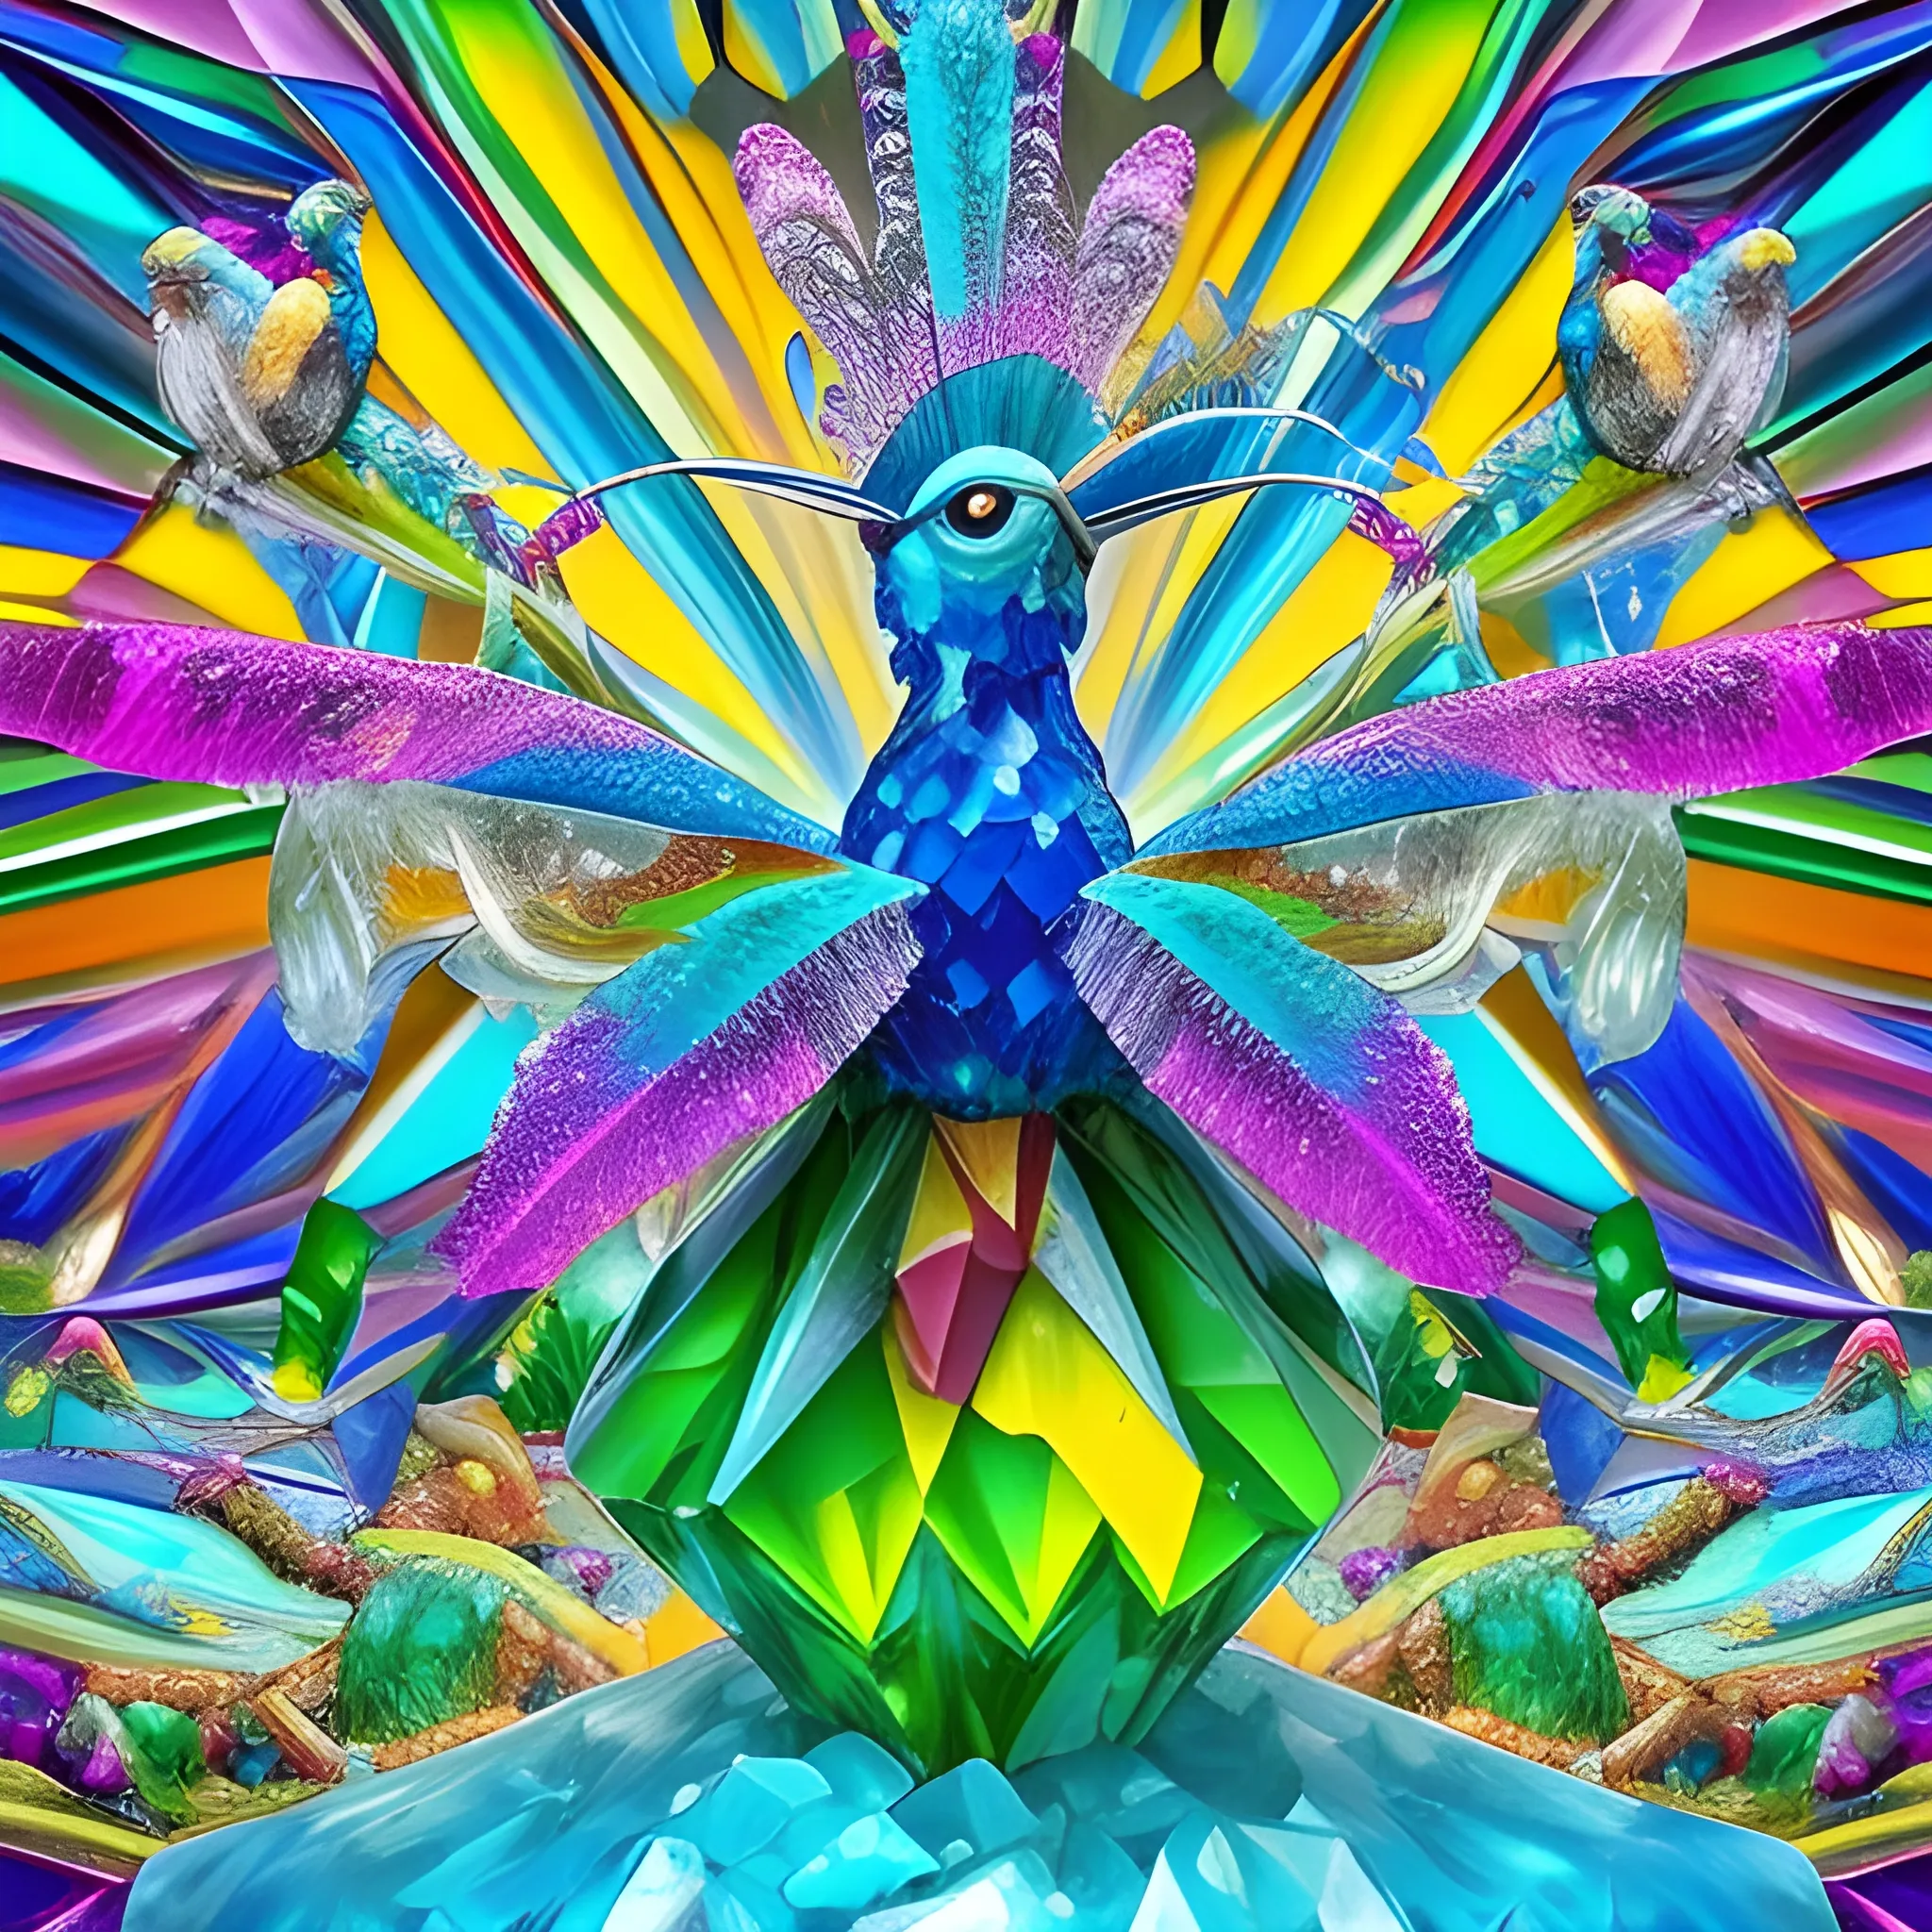 make a crystal sculpture of many crystal crazy birds of paradise with human face, crystal parrots around, many ice cubes  in the air, many plans of Amazon Rainforest, saturated colors, surrealism, chaotic background, 3D, Trippy,  eerie atmosphere, close up, Oil Painting, high level of detail, wide dynamic range, macro photography,  wide-angle view  